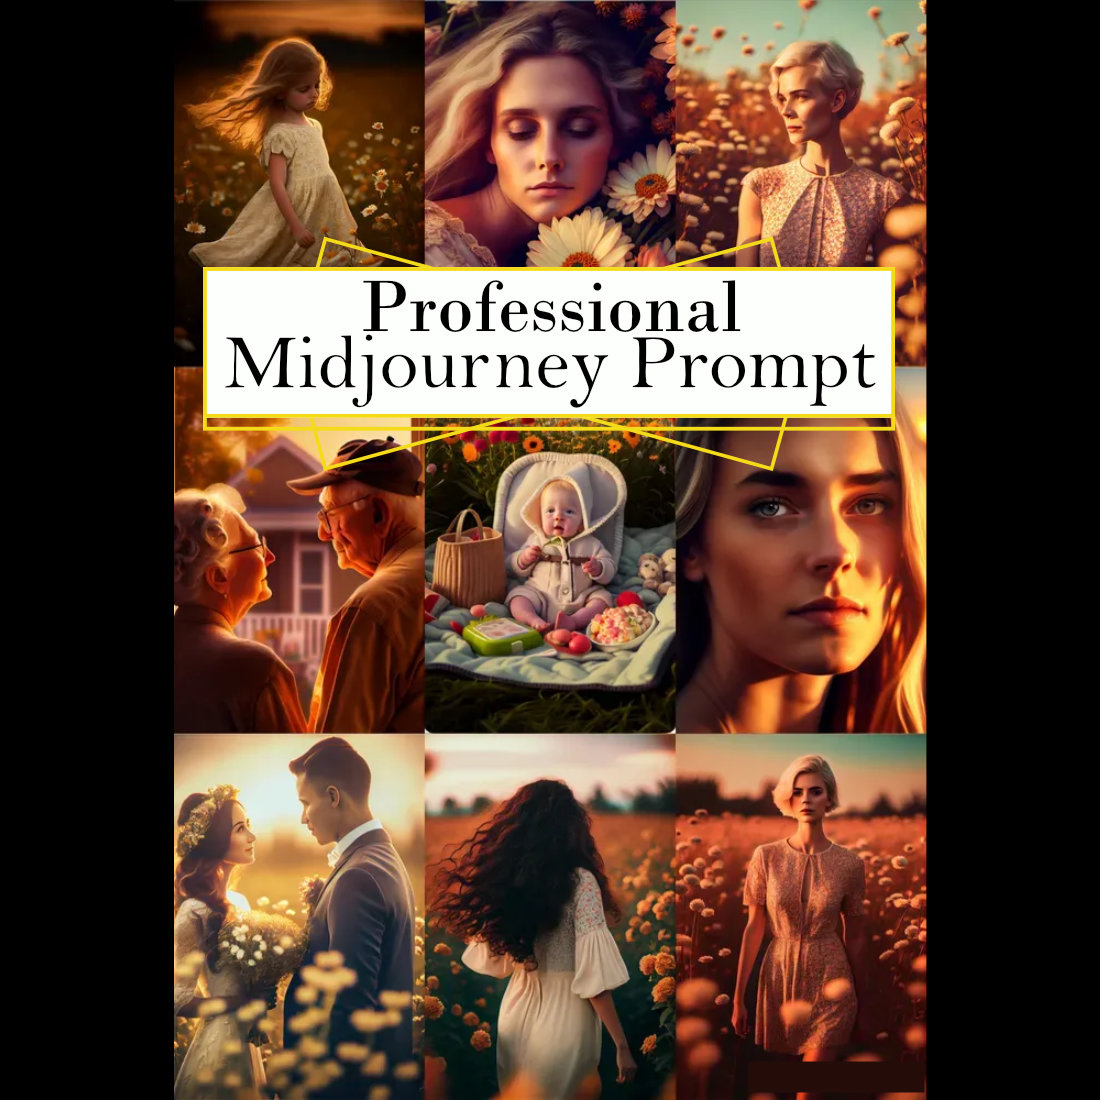 Golden Hour Photography Midjourney Prompt cover image.